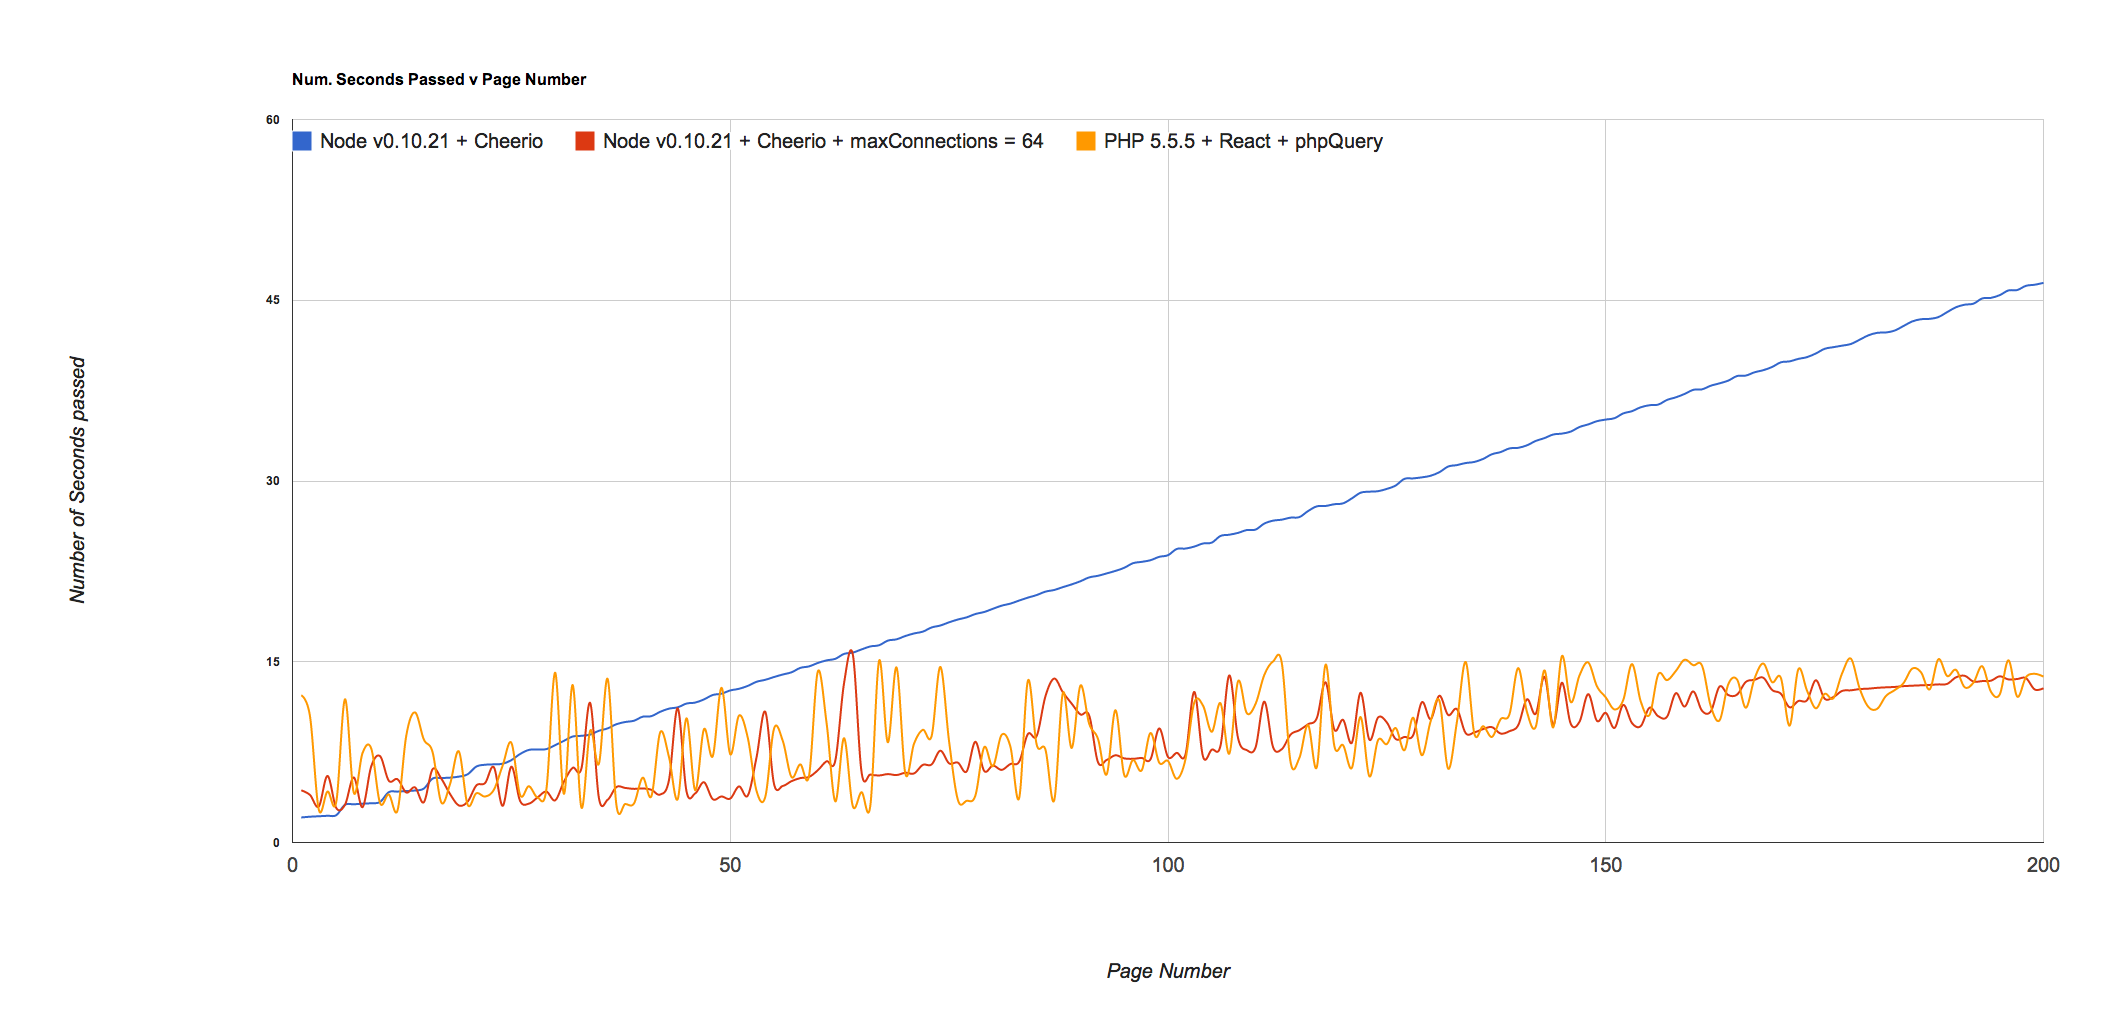 PHP and Node.js are equally fast when async